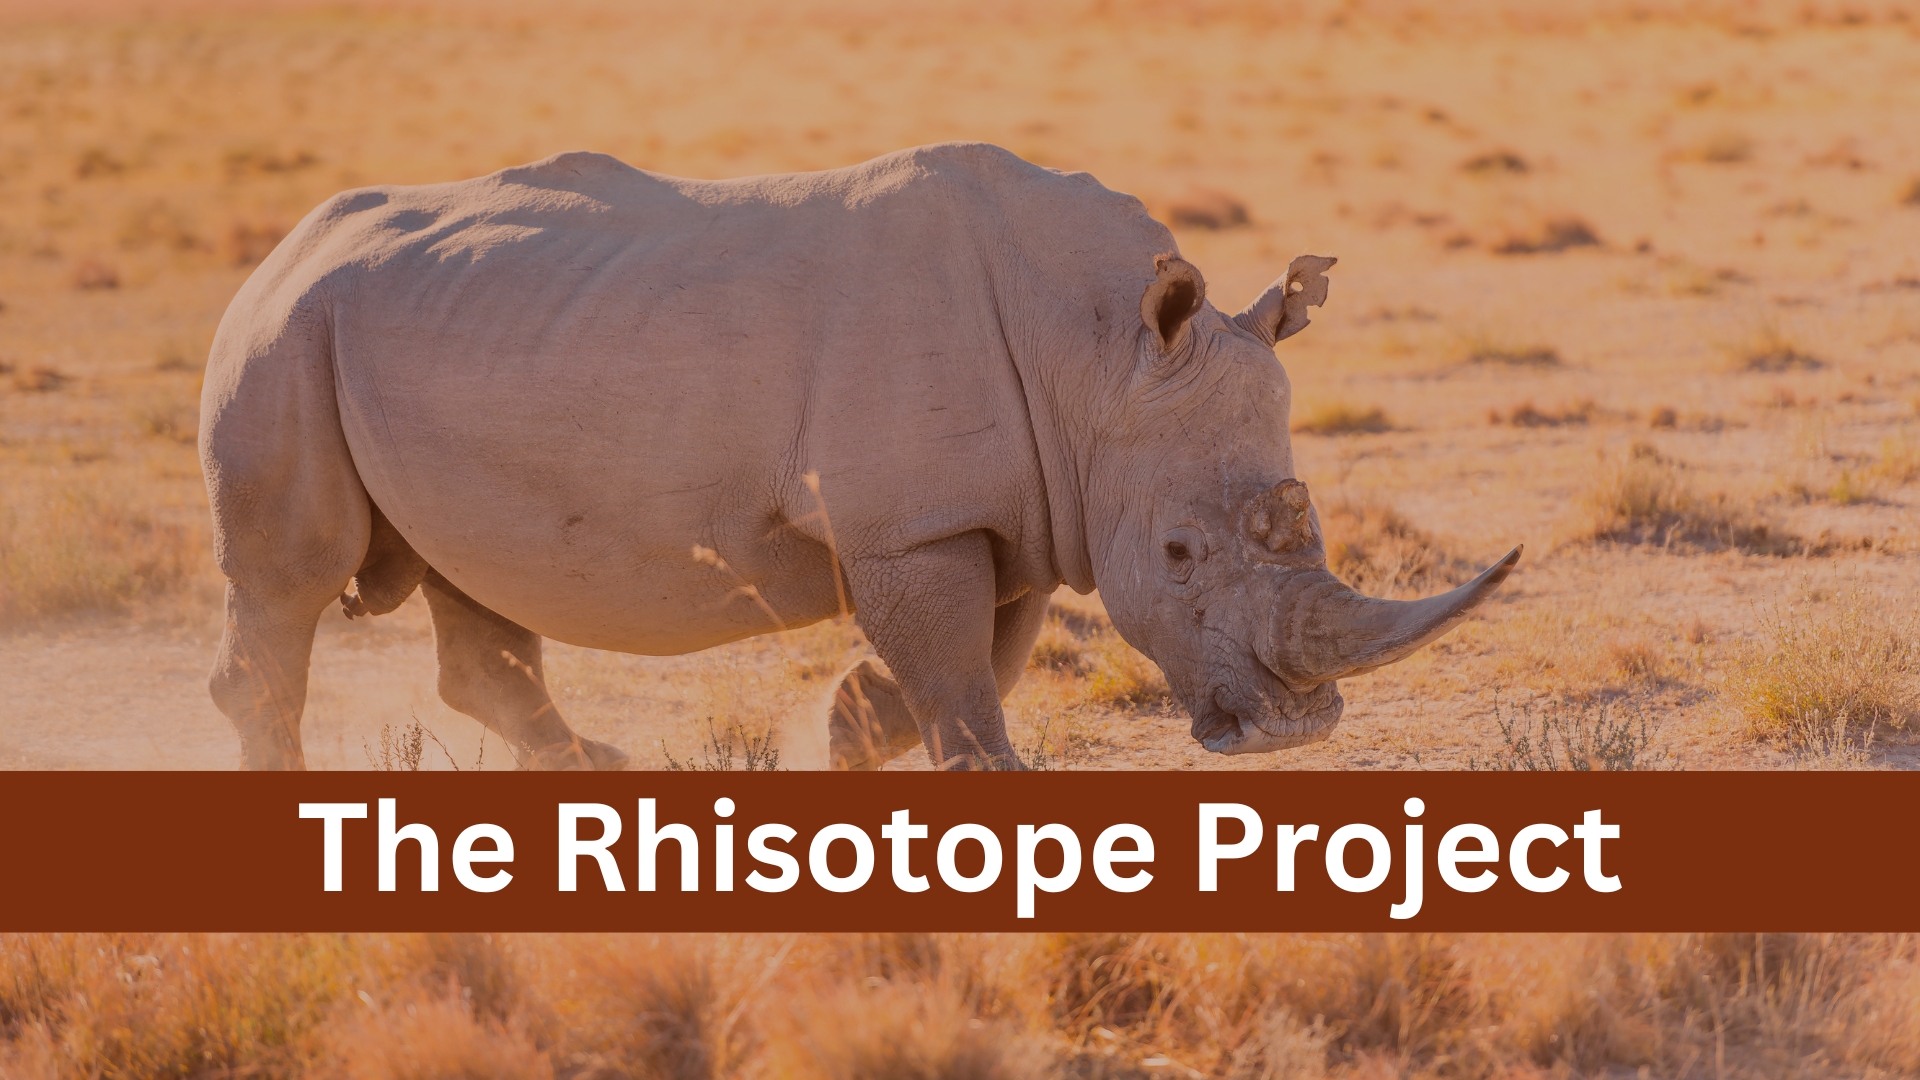 Rhisotope project